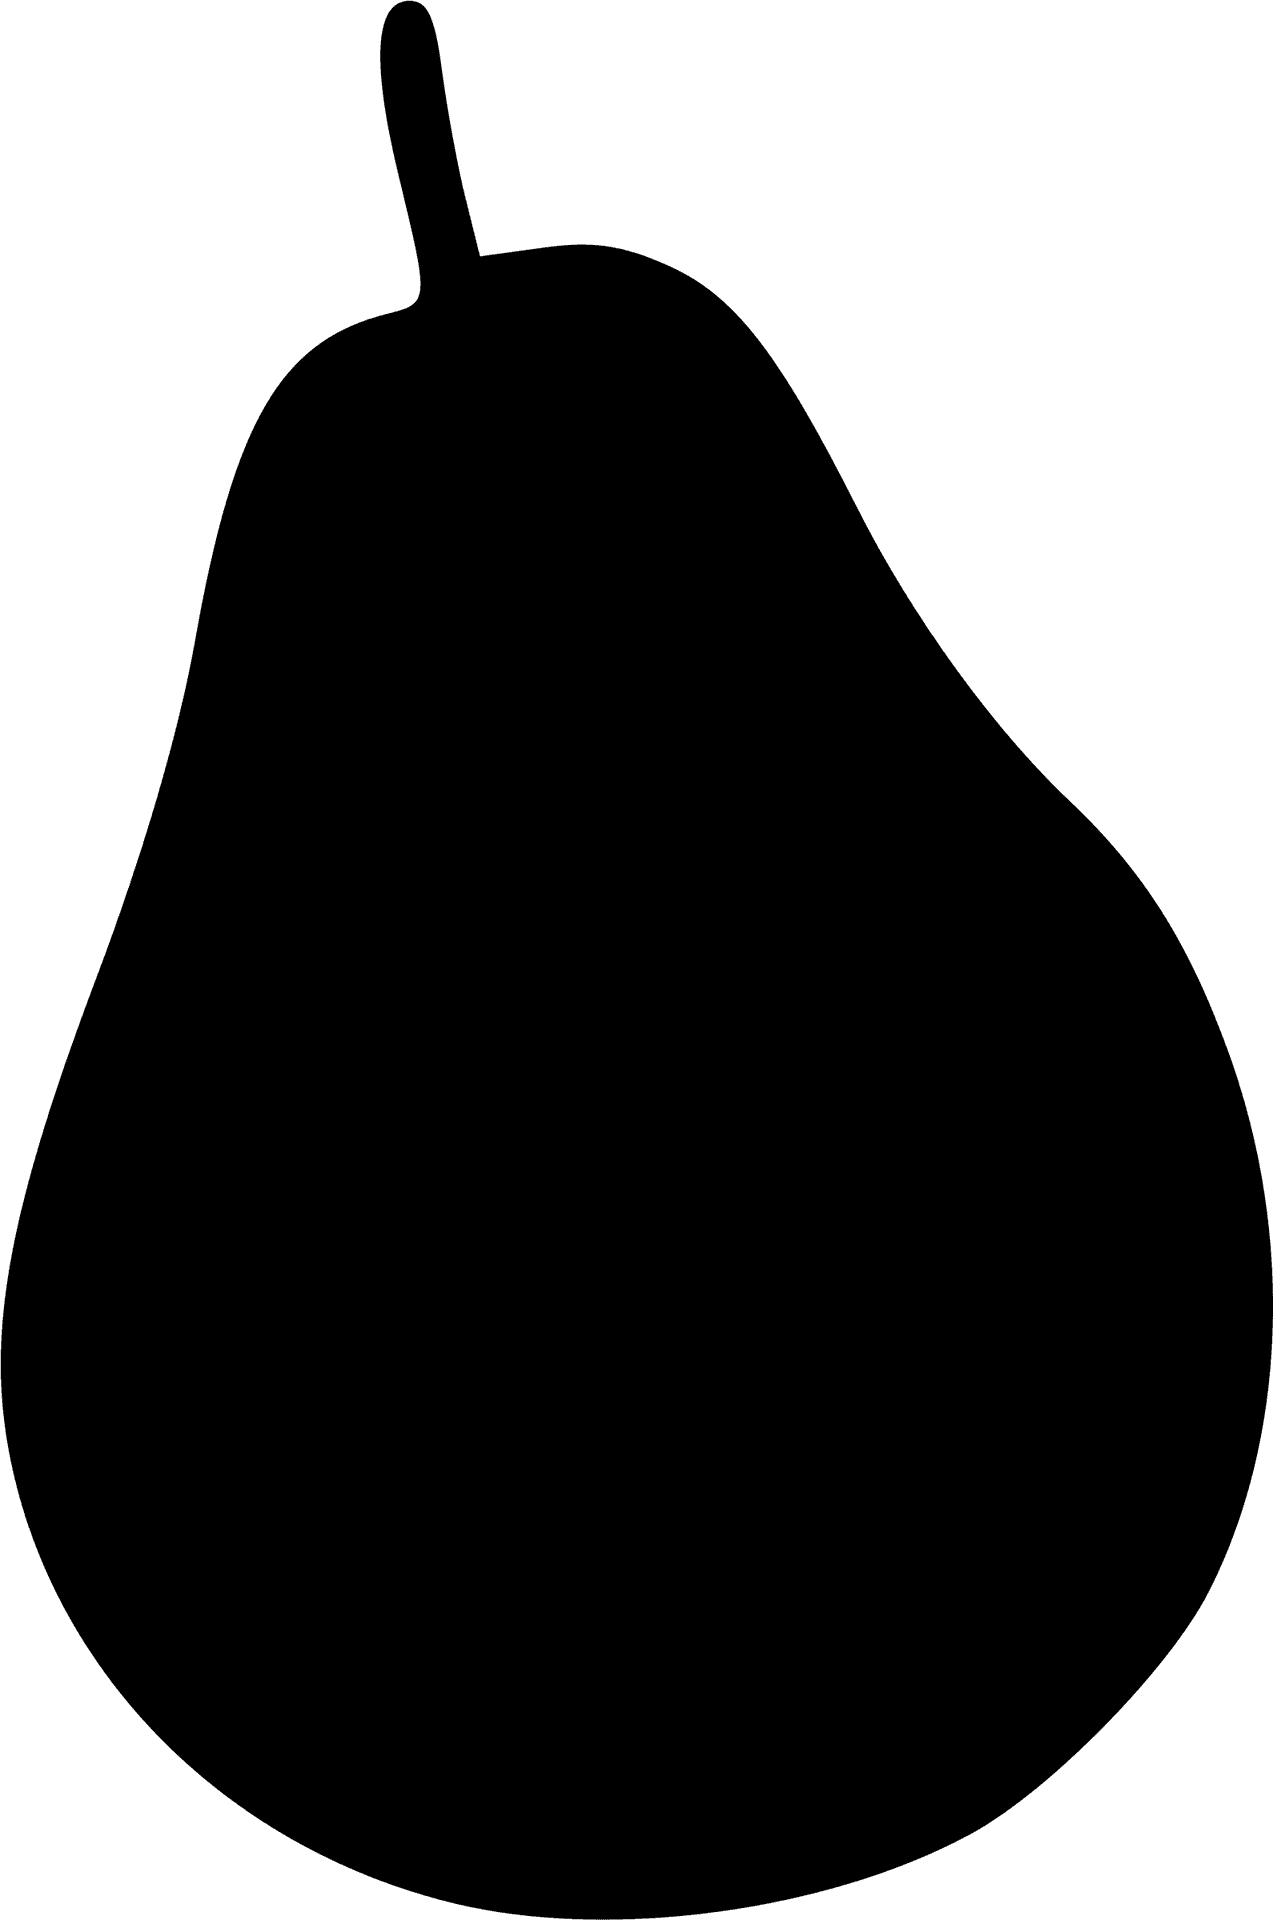 Silhouetteof Pear Graphic PNG